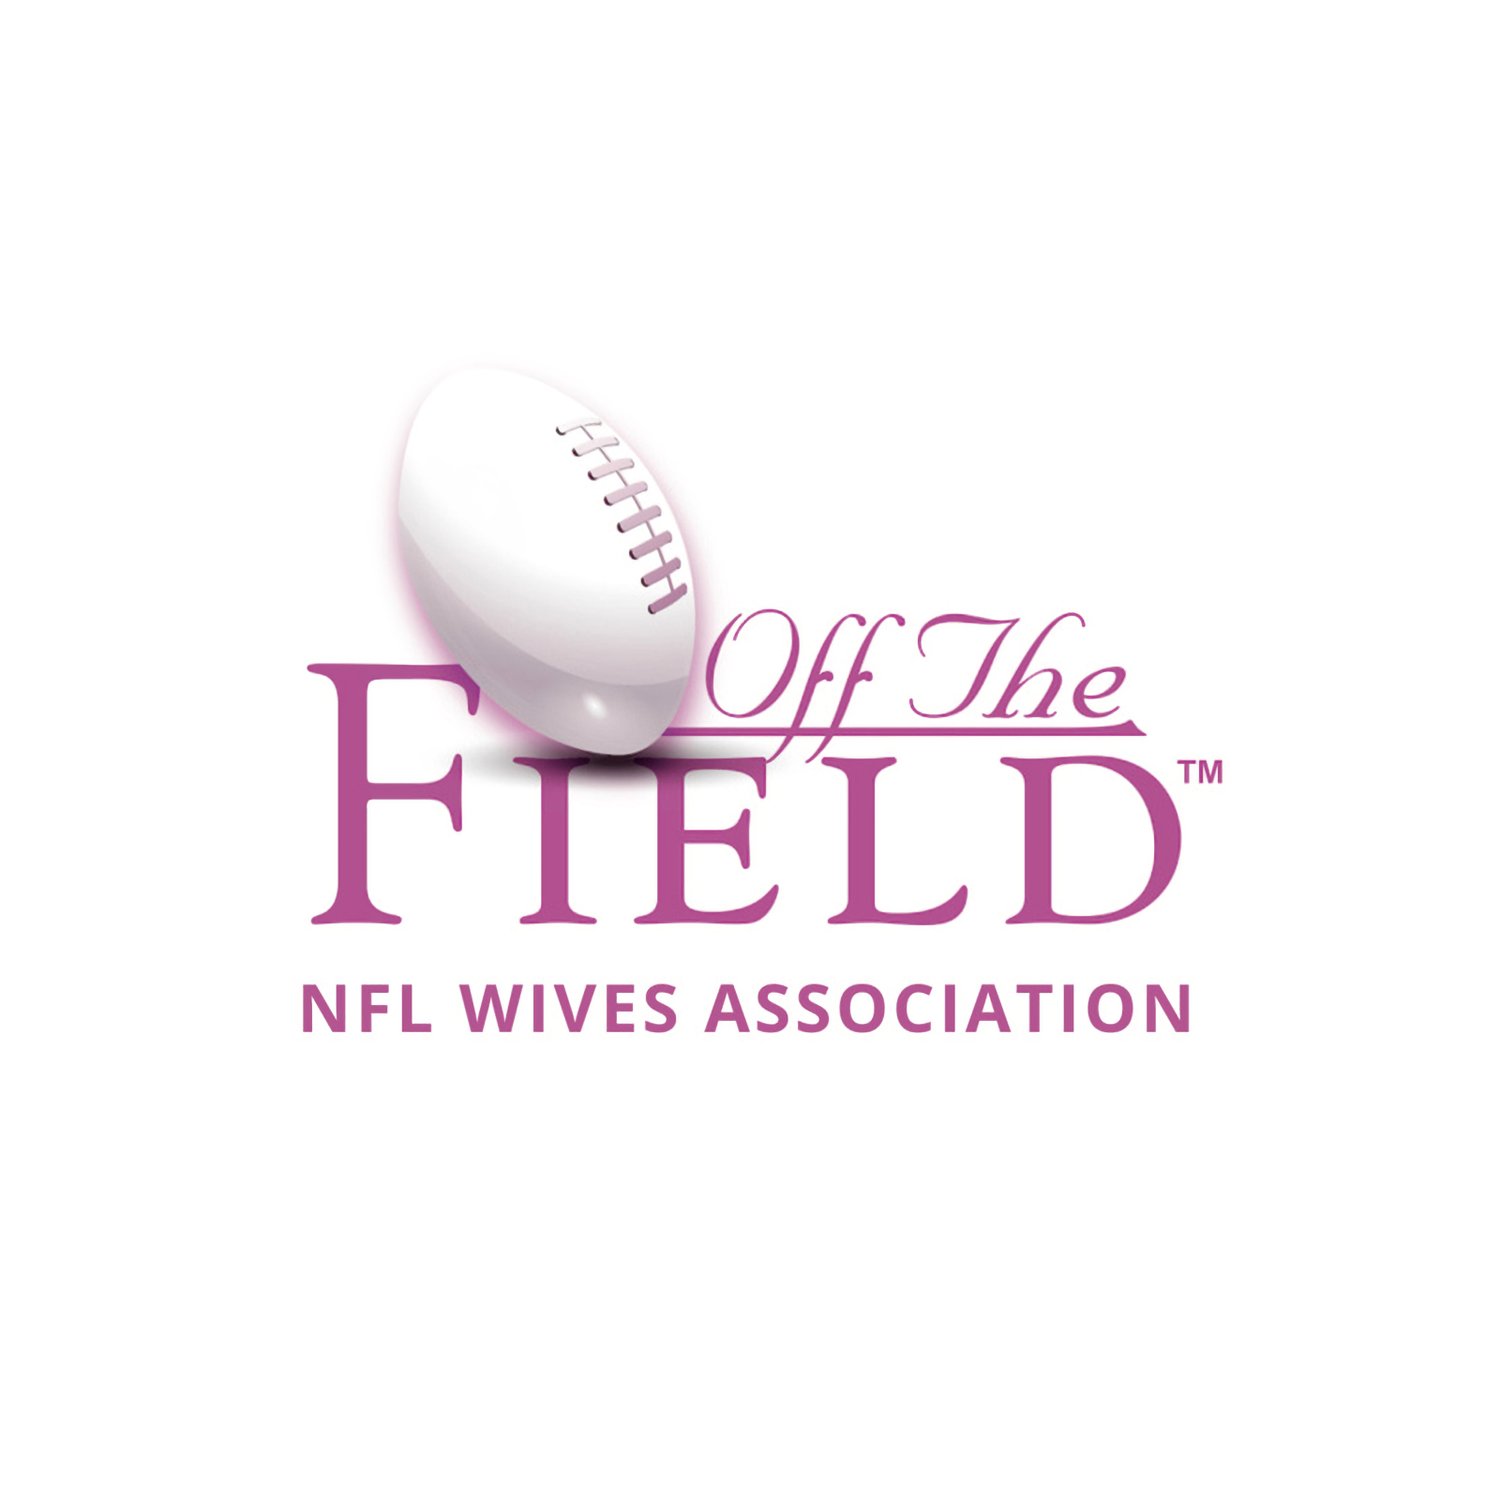 OFF THE FIELD NFL WIVES ASSOCIATION